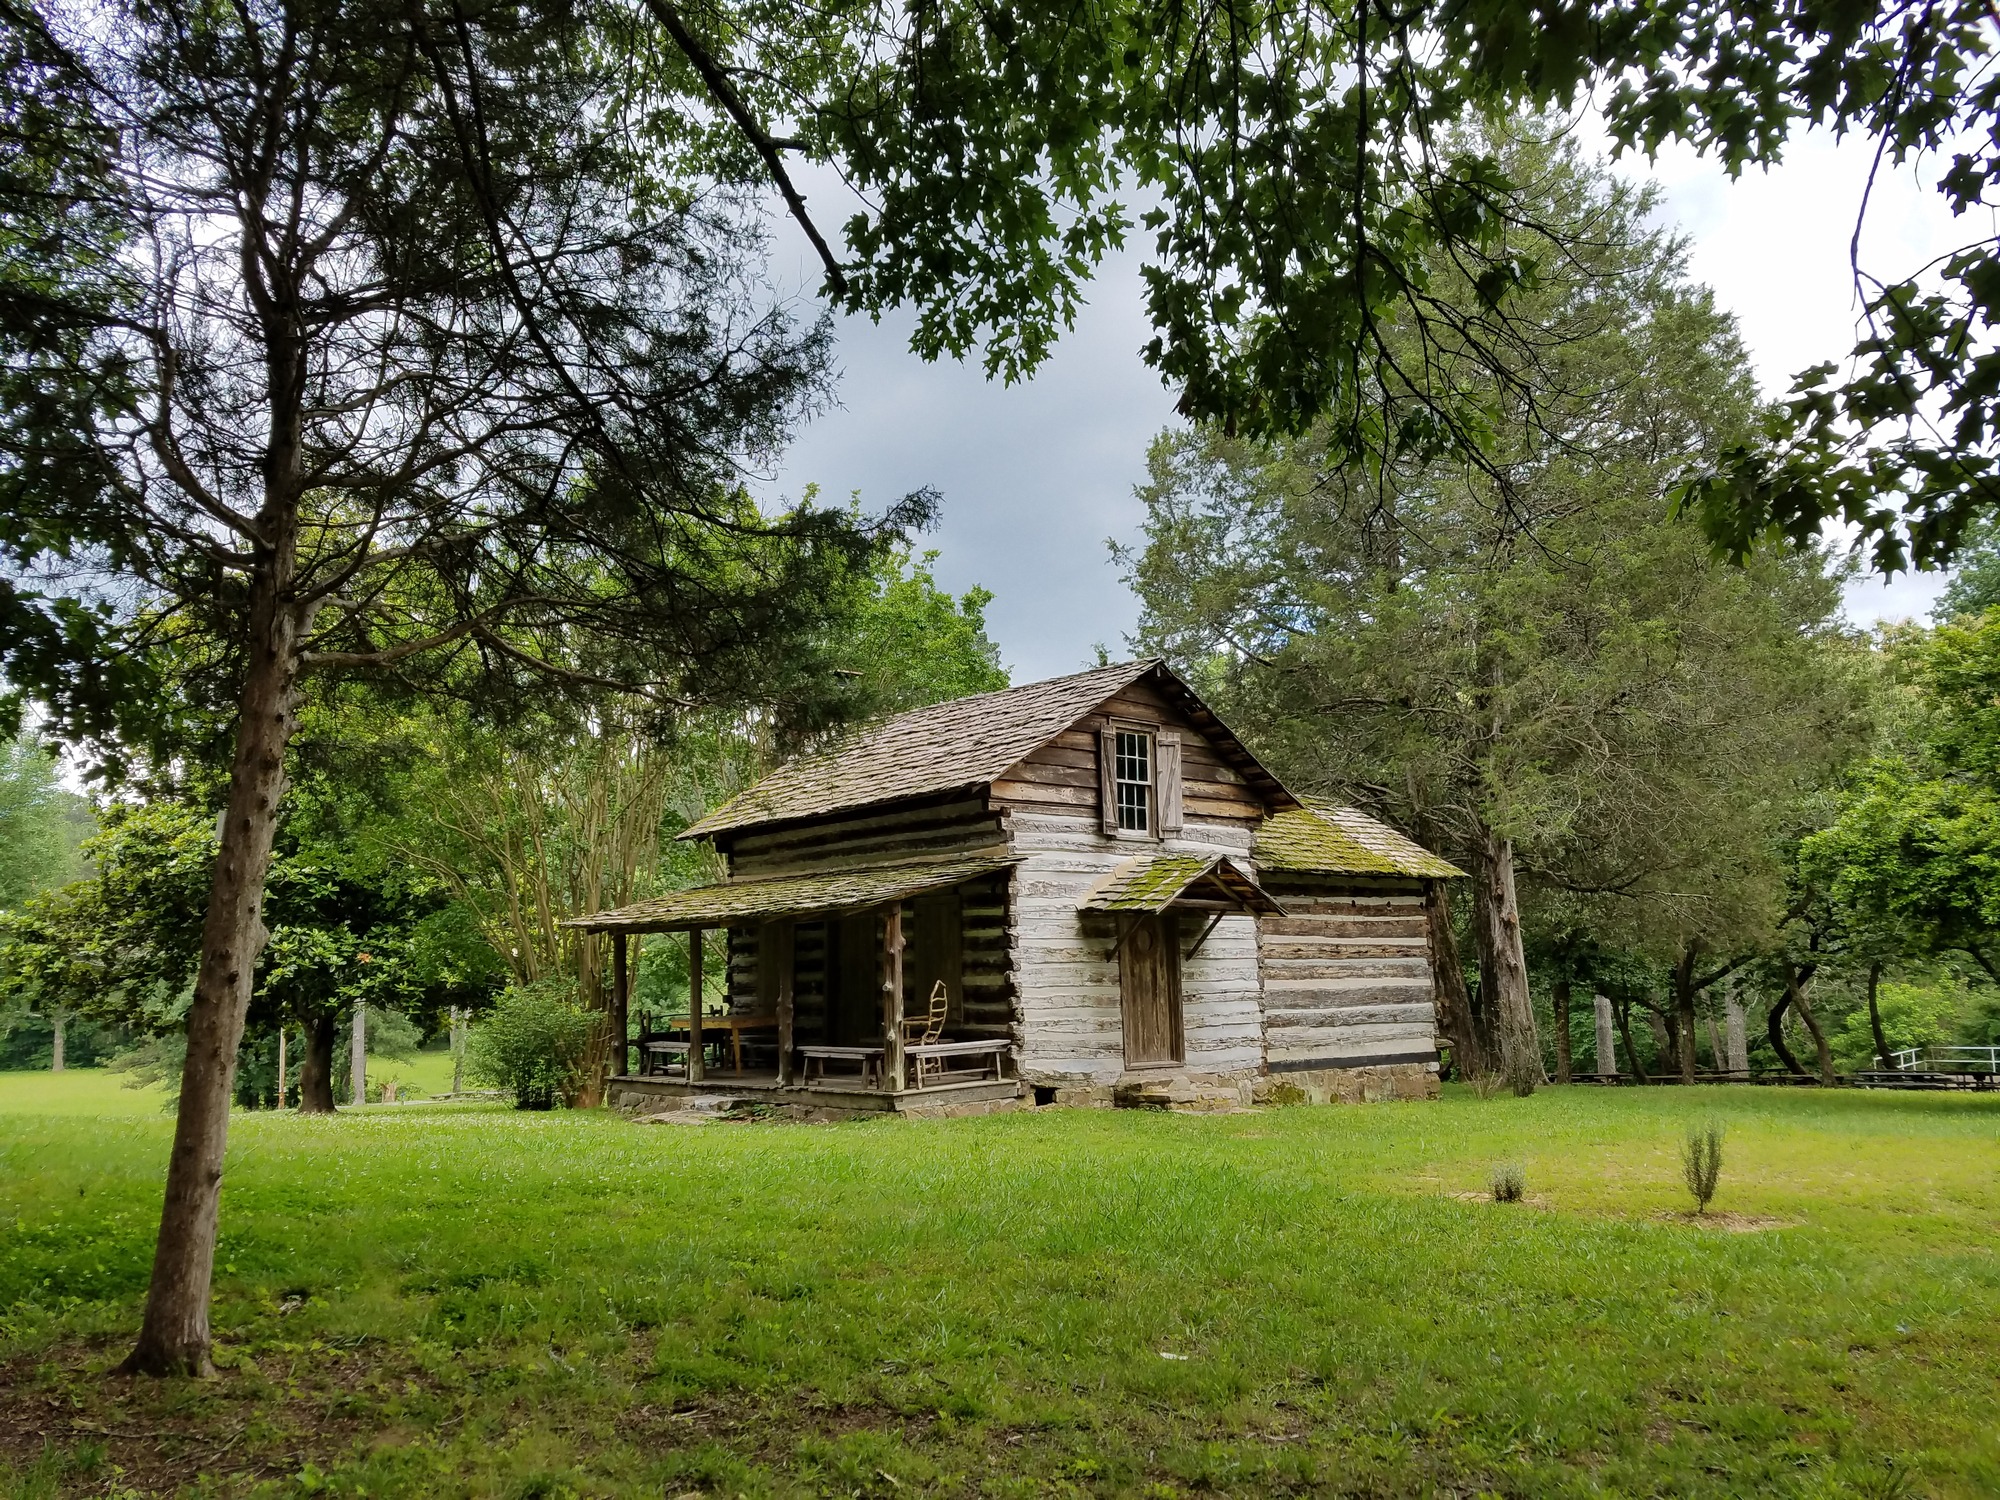 The Spring Frog Cabin and property at Audubon Acres in Chattanooga, Tennessee